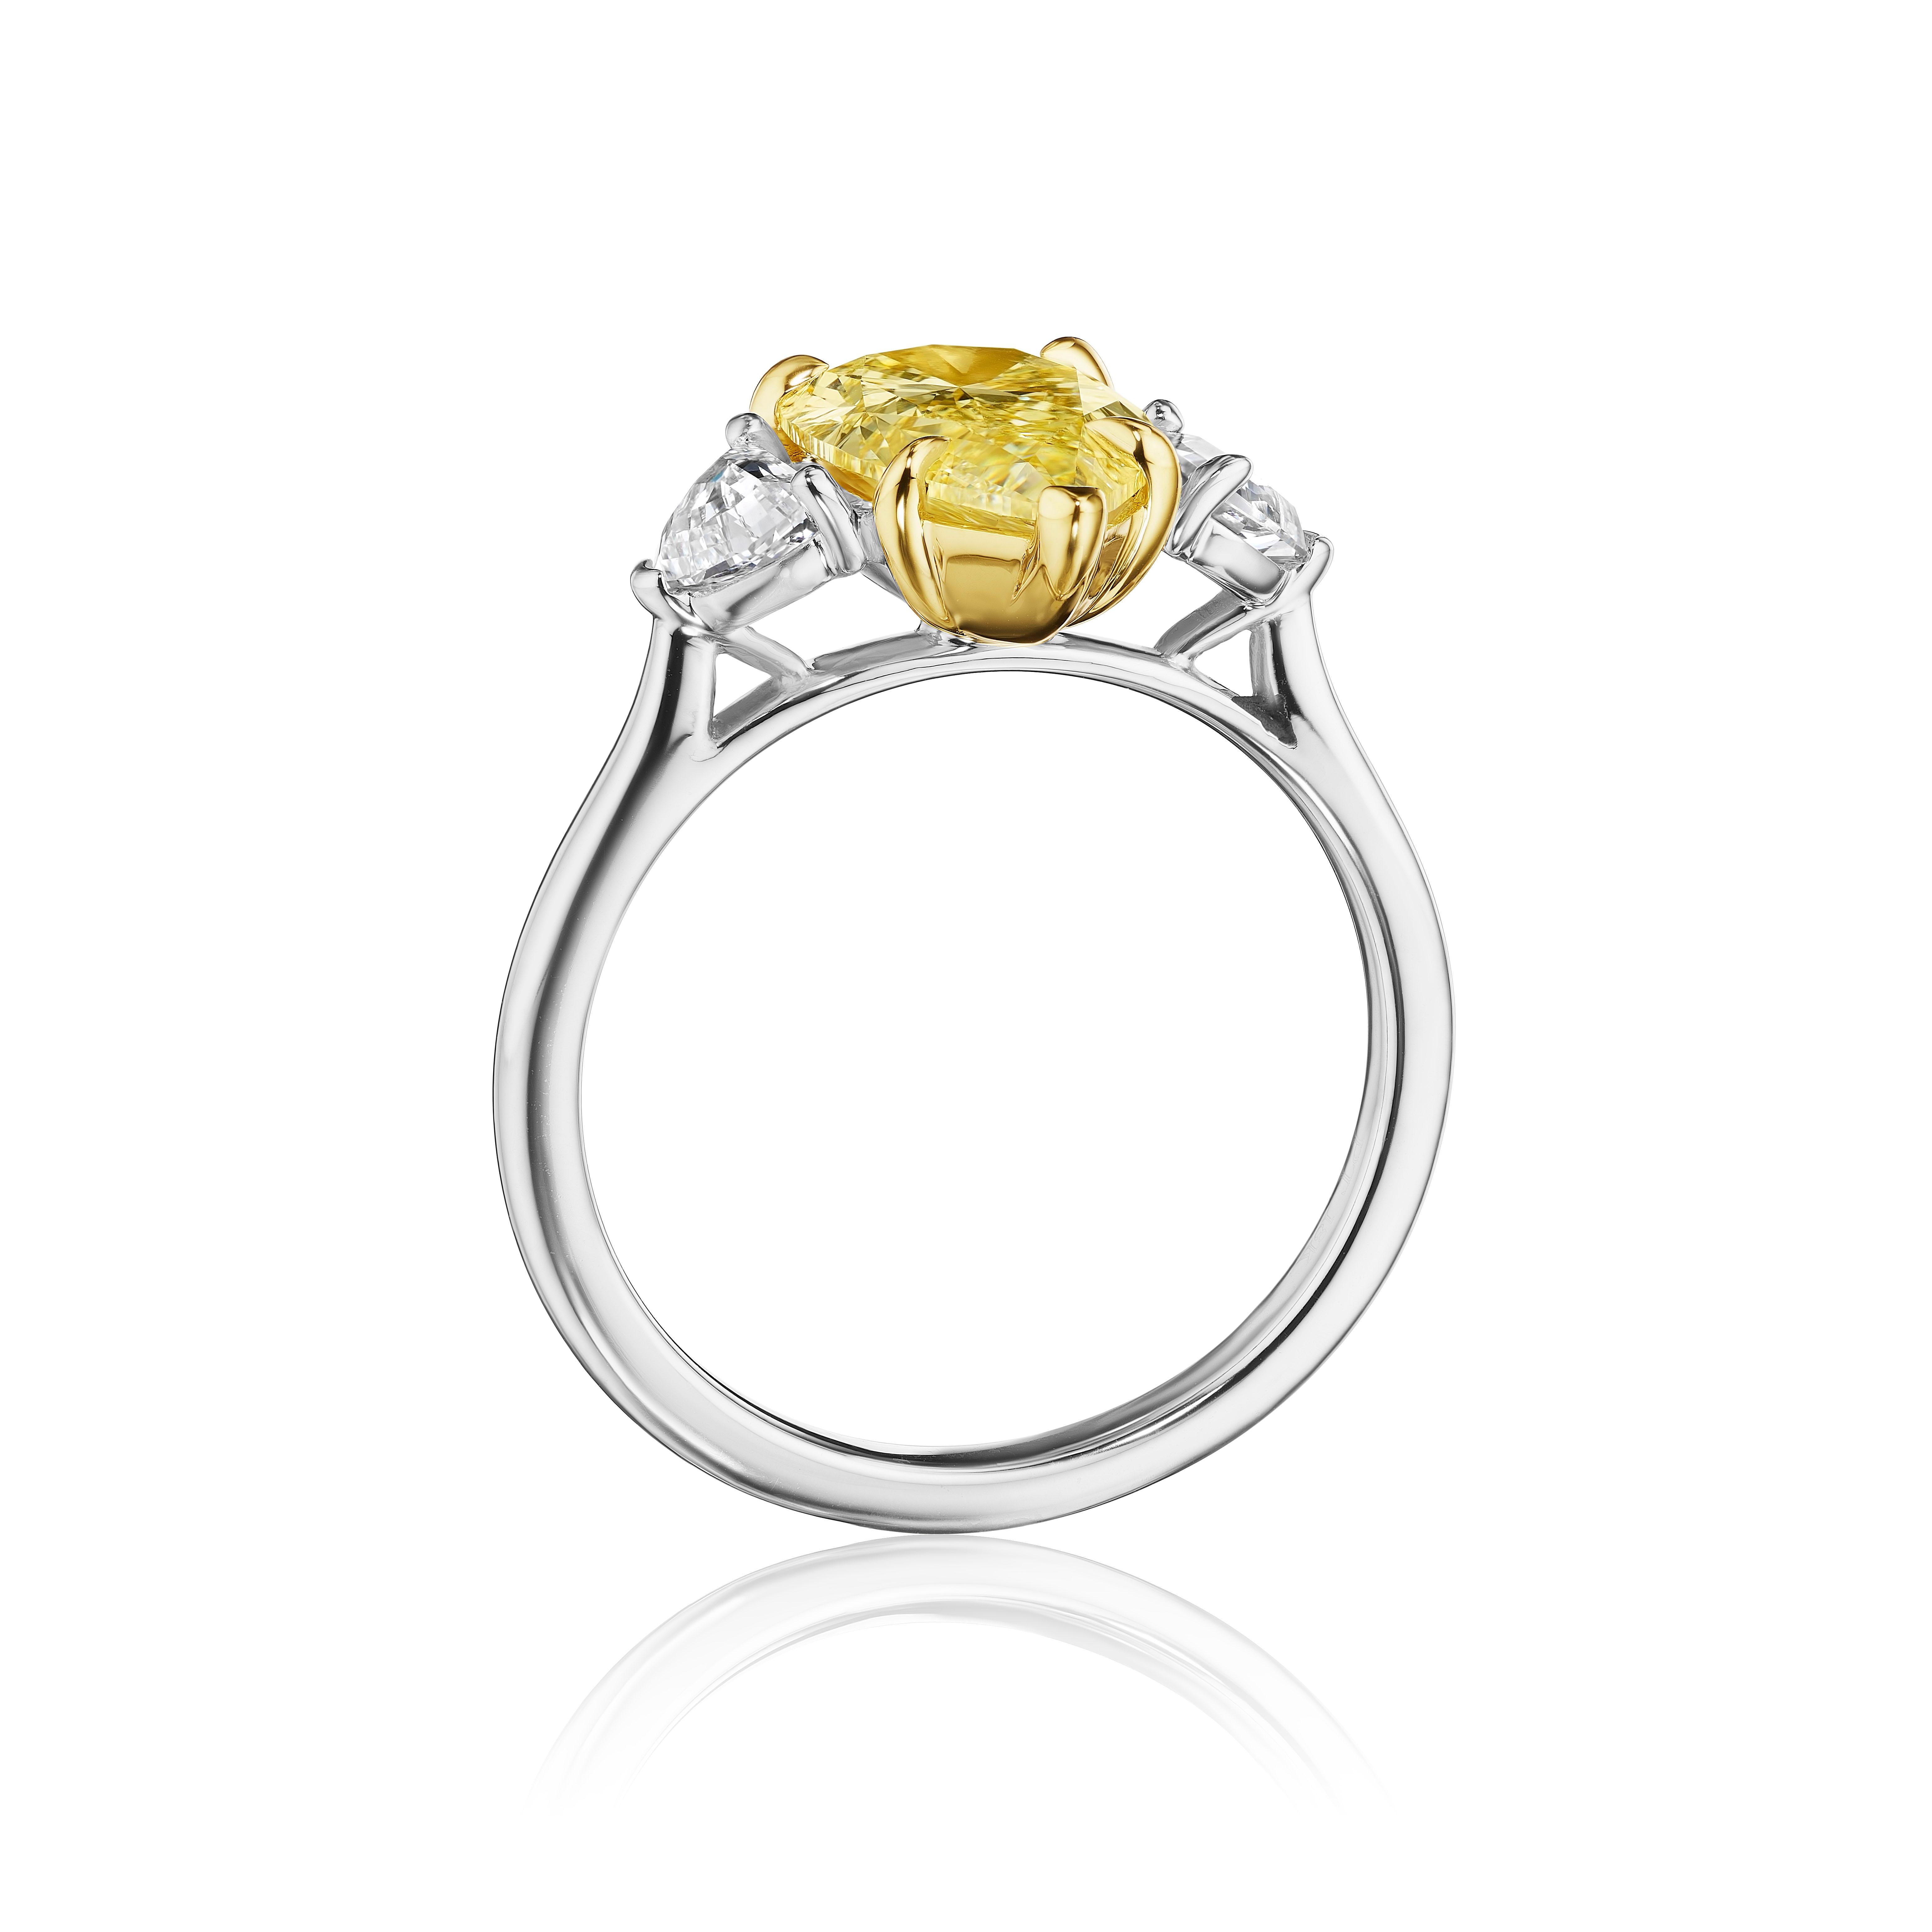 •	Platinum & 18KT Two Tone
•	3.11 Carats
•	Size: 6.5

•	Number of Pear Shape Diamonds: 1
•	Carat Weight: 2.51ctw
•	Color: Fancy Light Yellow
•	Clarity: SI2
•	Stone Measurements: 13.28 x 7.40mm
•	GIA: 2225795915

•	Number of Cadillac Cut Diamonds: